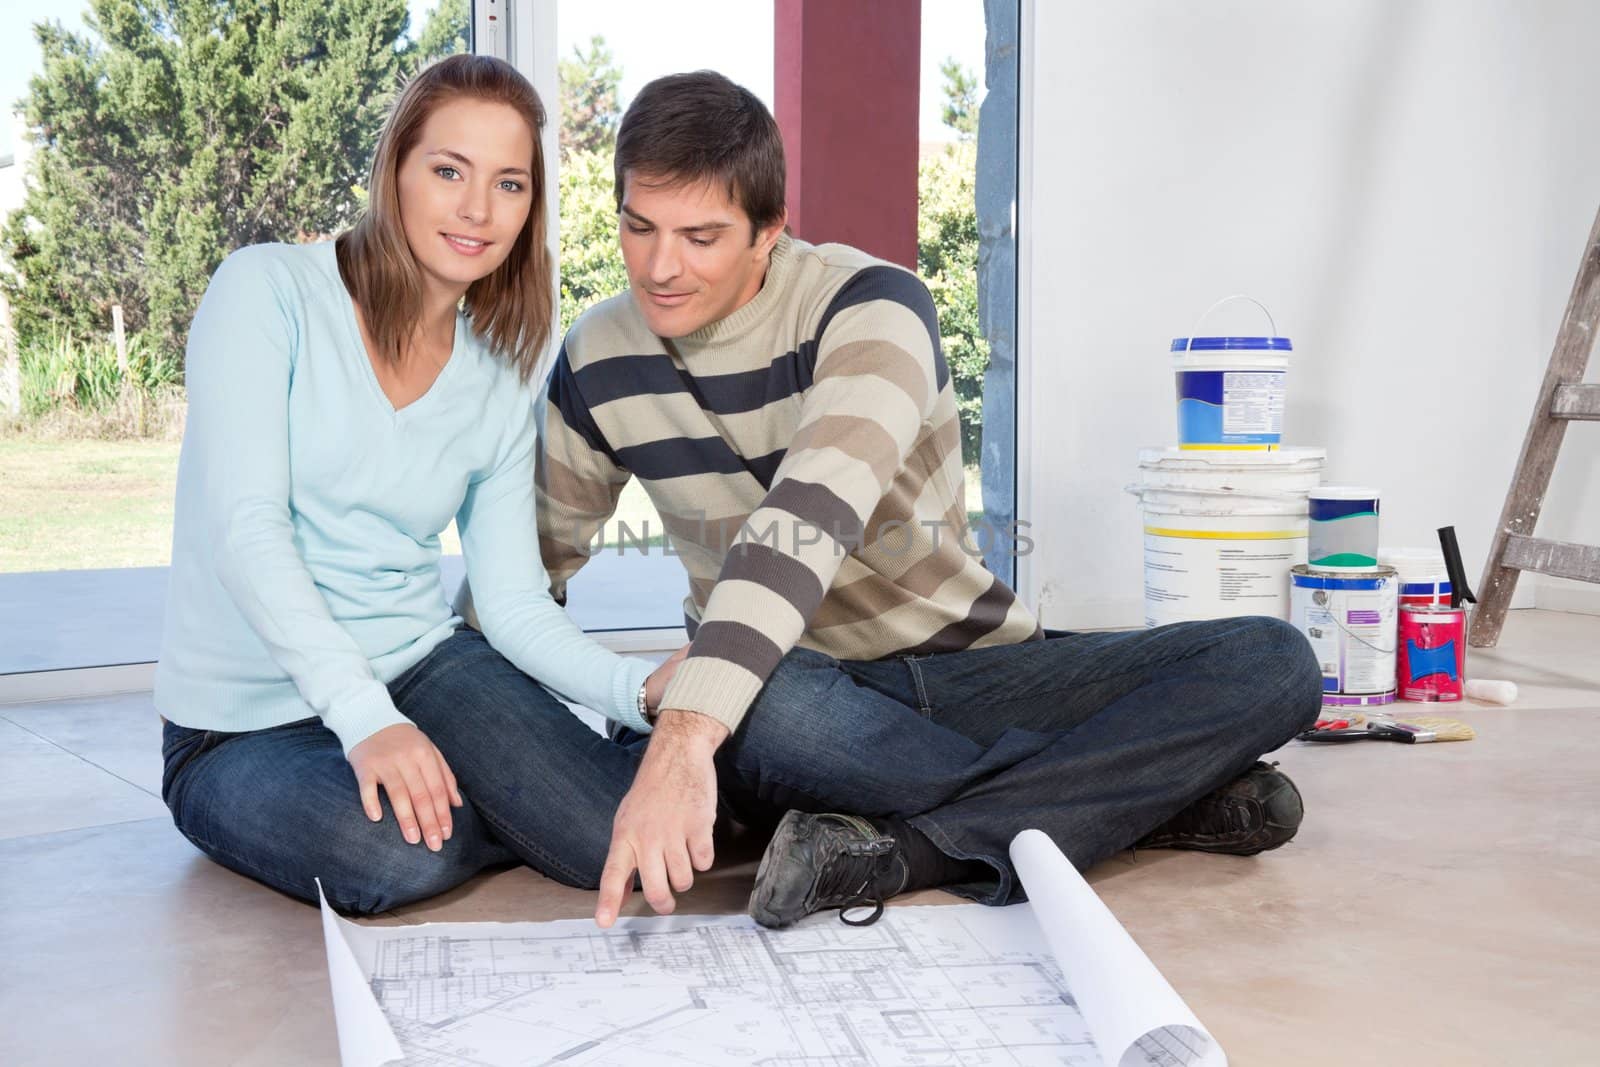 Mature couple sitting on the floor with blueprint of their new house